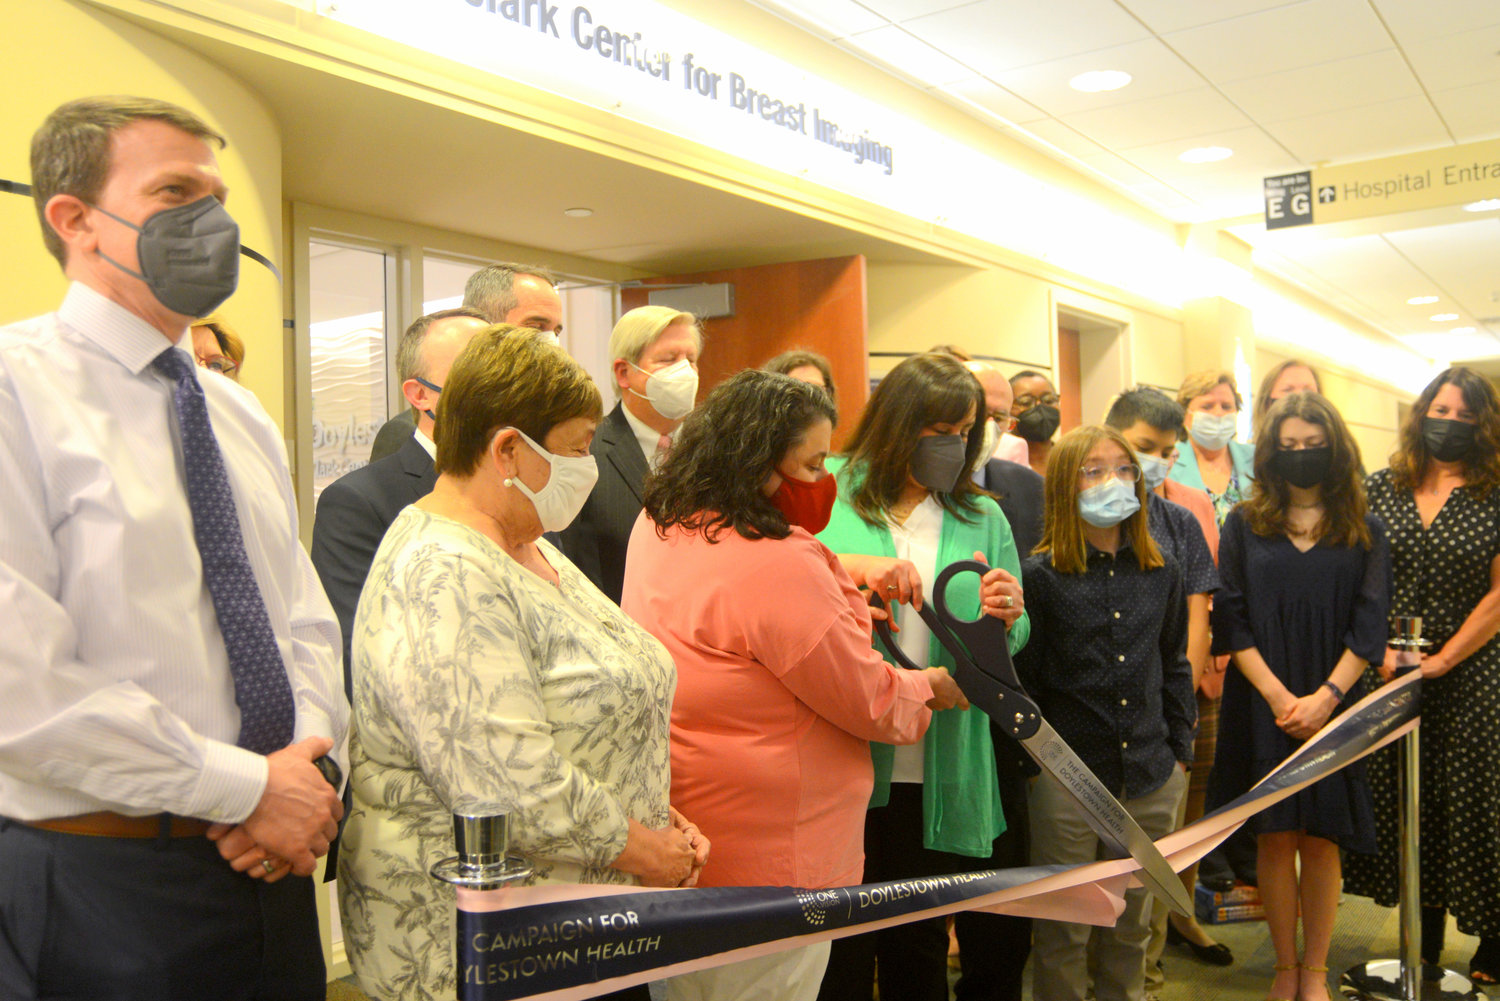 The Clark family cuts the ribbon for the Clark Center for Breast Imaging at Doylestown Hospital.